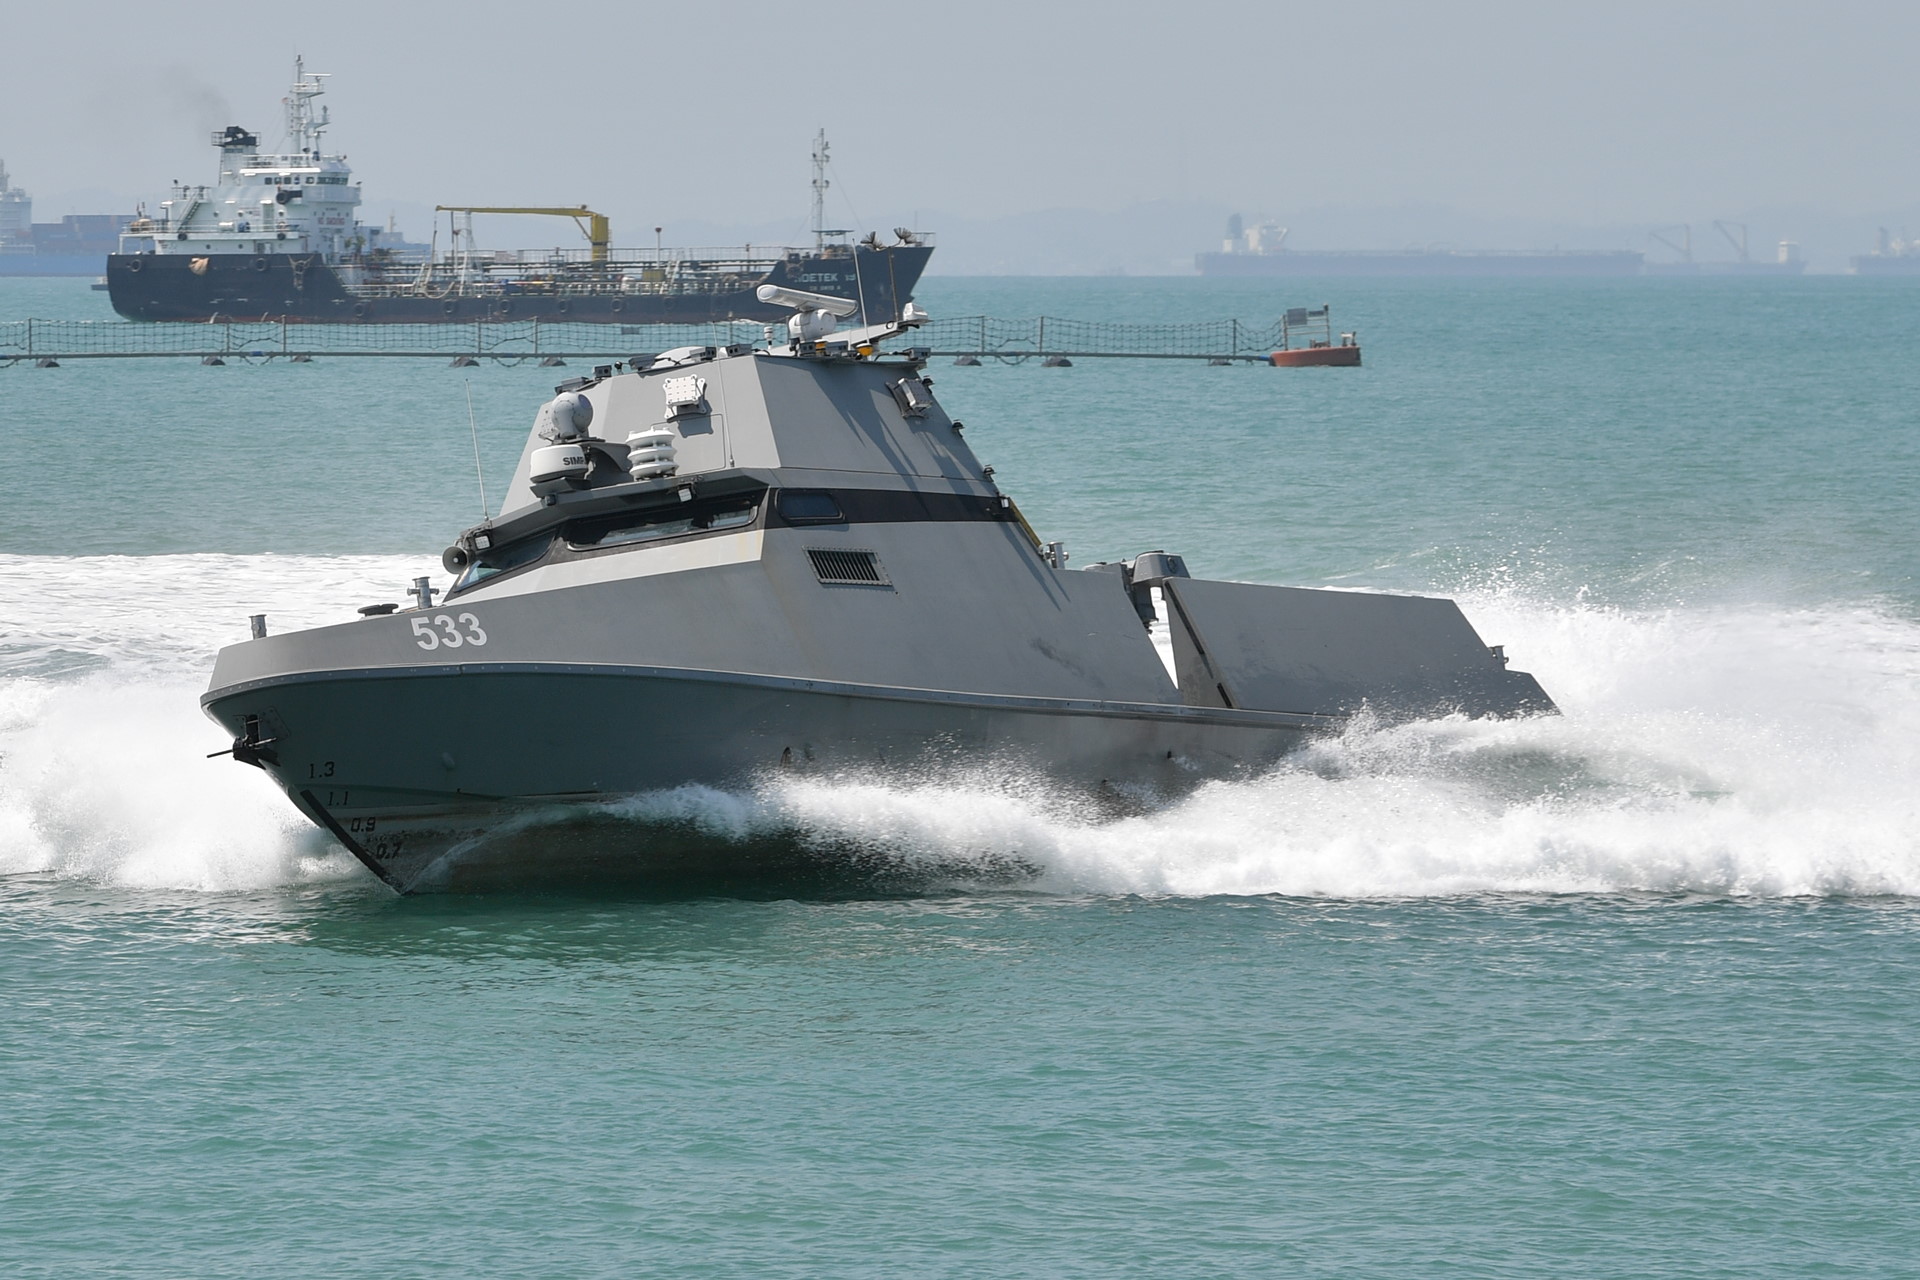 Self-driving unmanned vessels to patrol S'pore waters